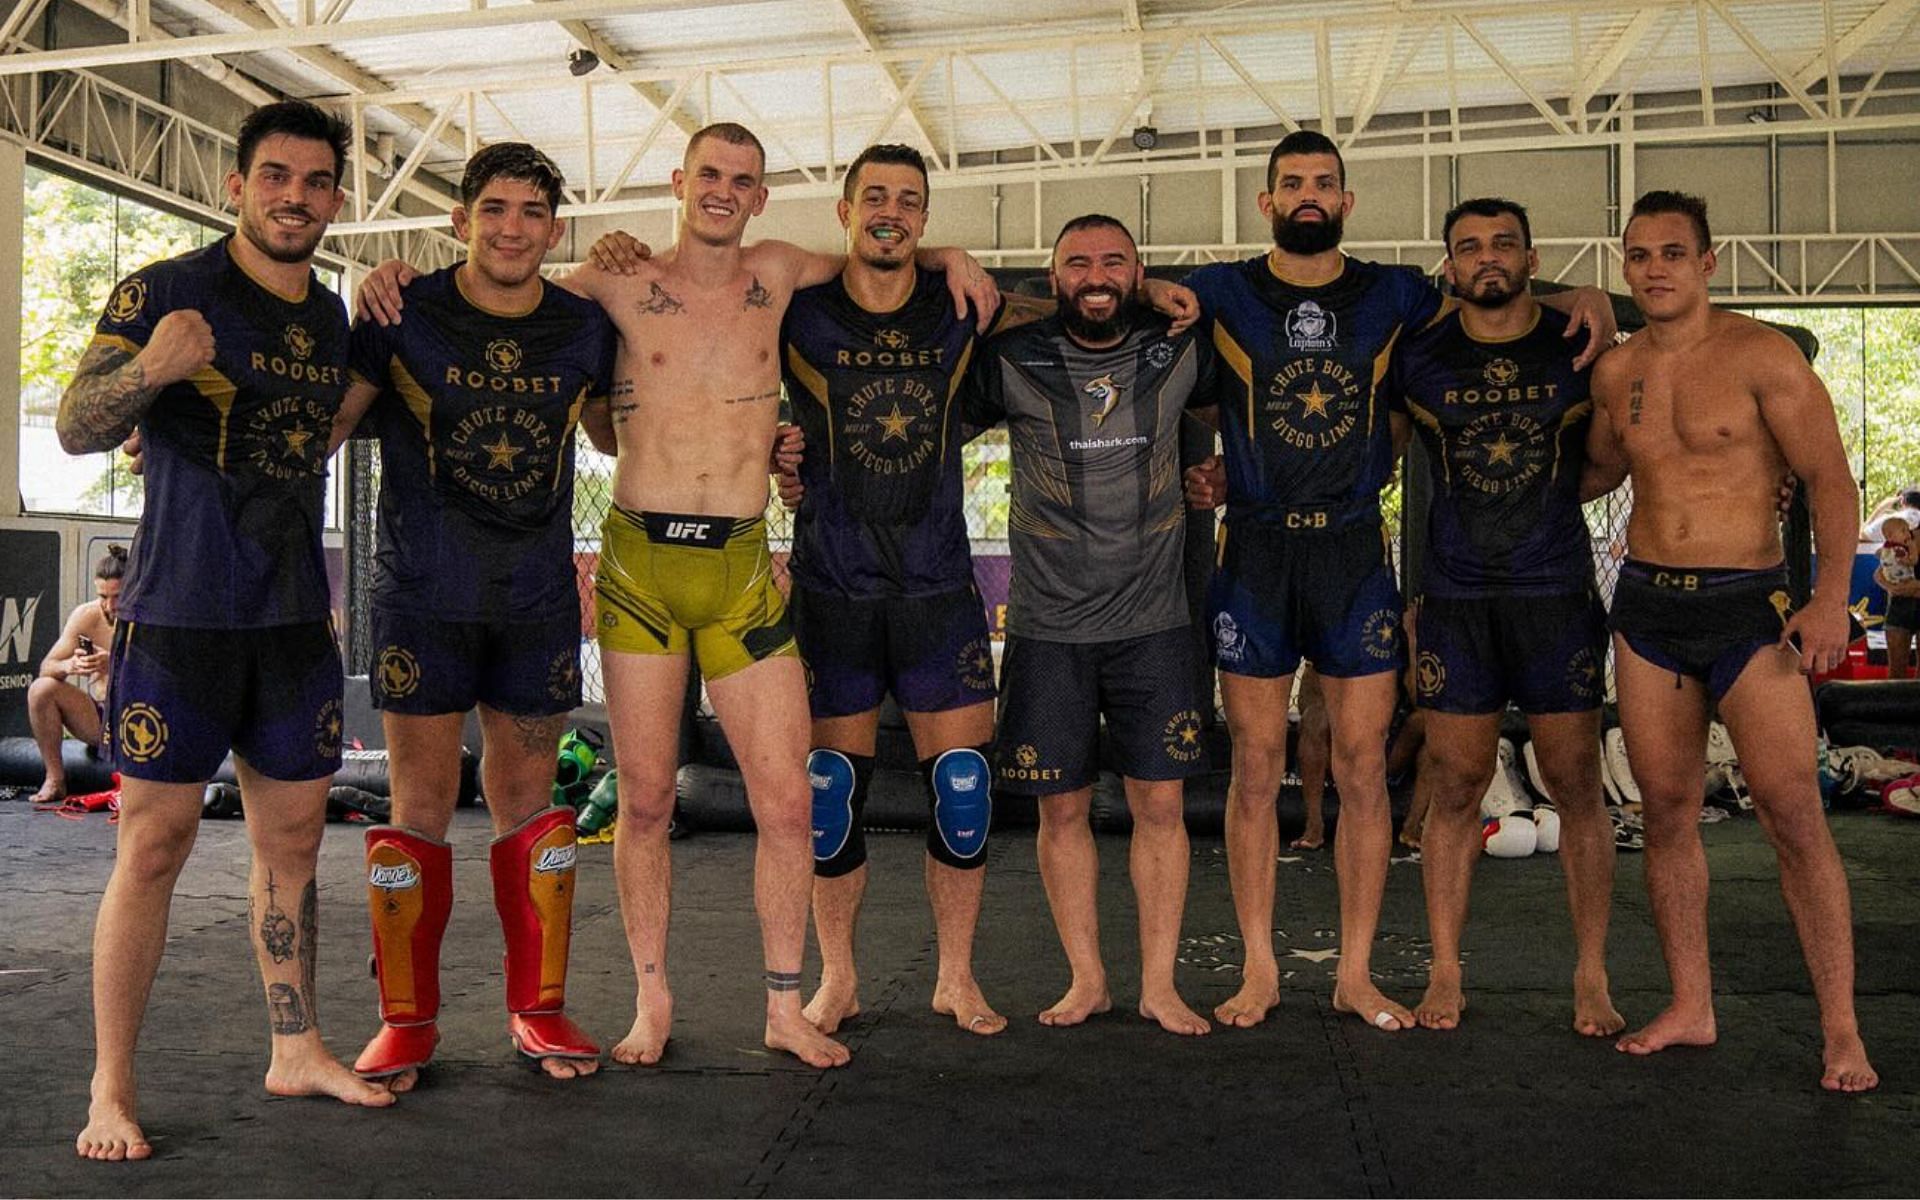 Ian Machado Garry (third from left) training with the Chute Boxe team in Brazil [Photo Courtesy @iangarry on Instagram]